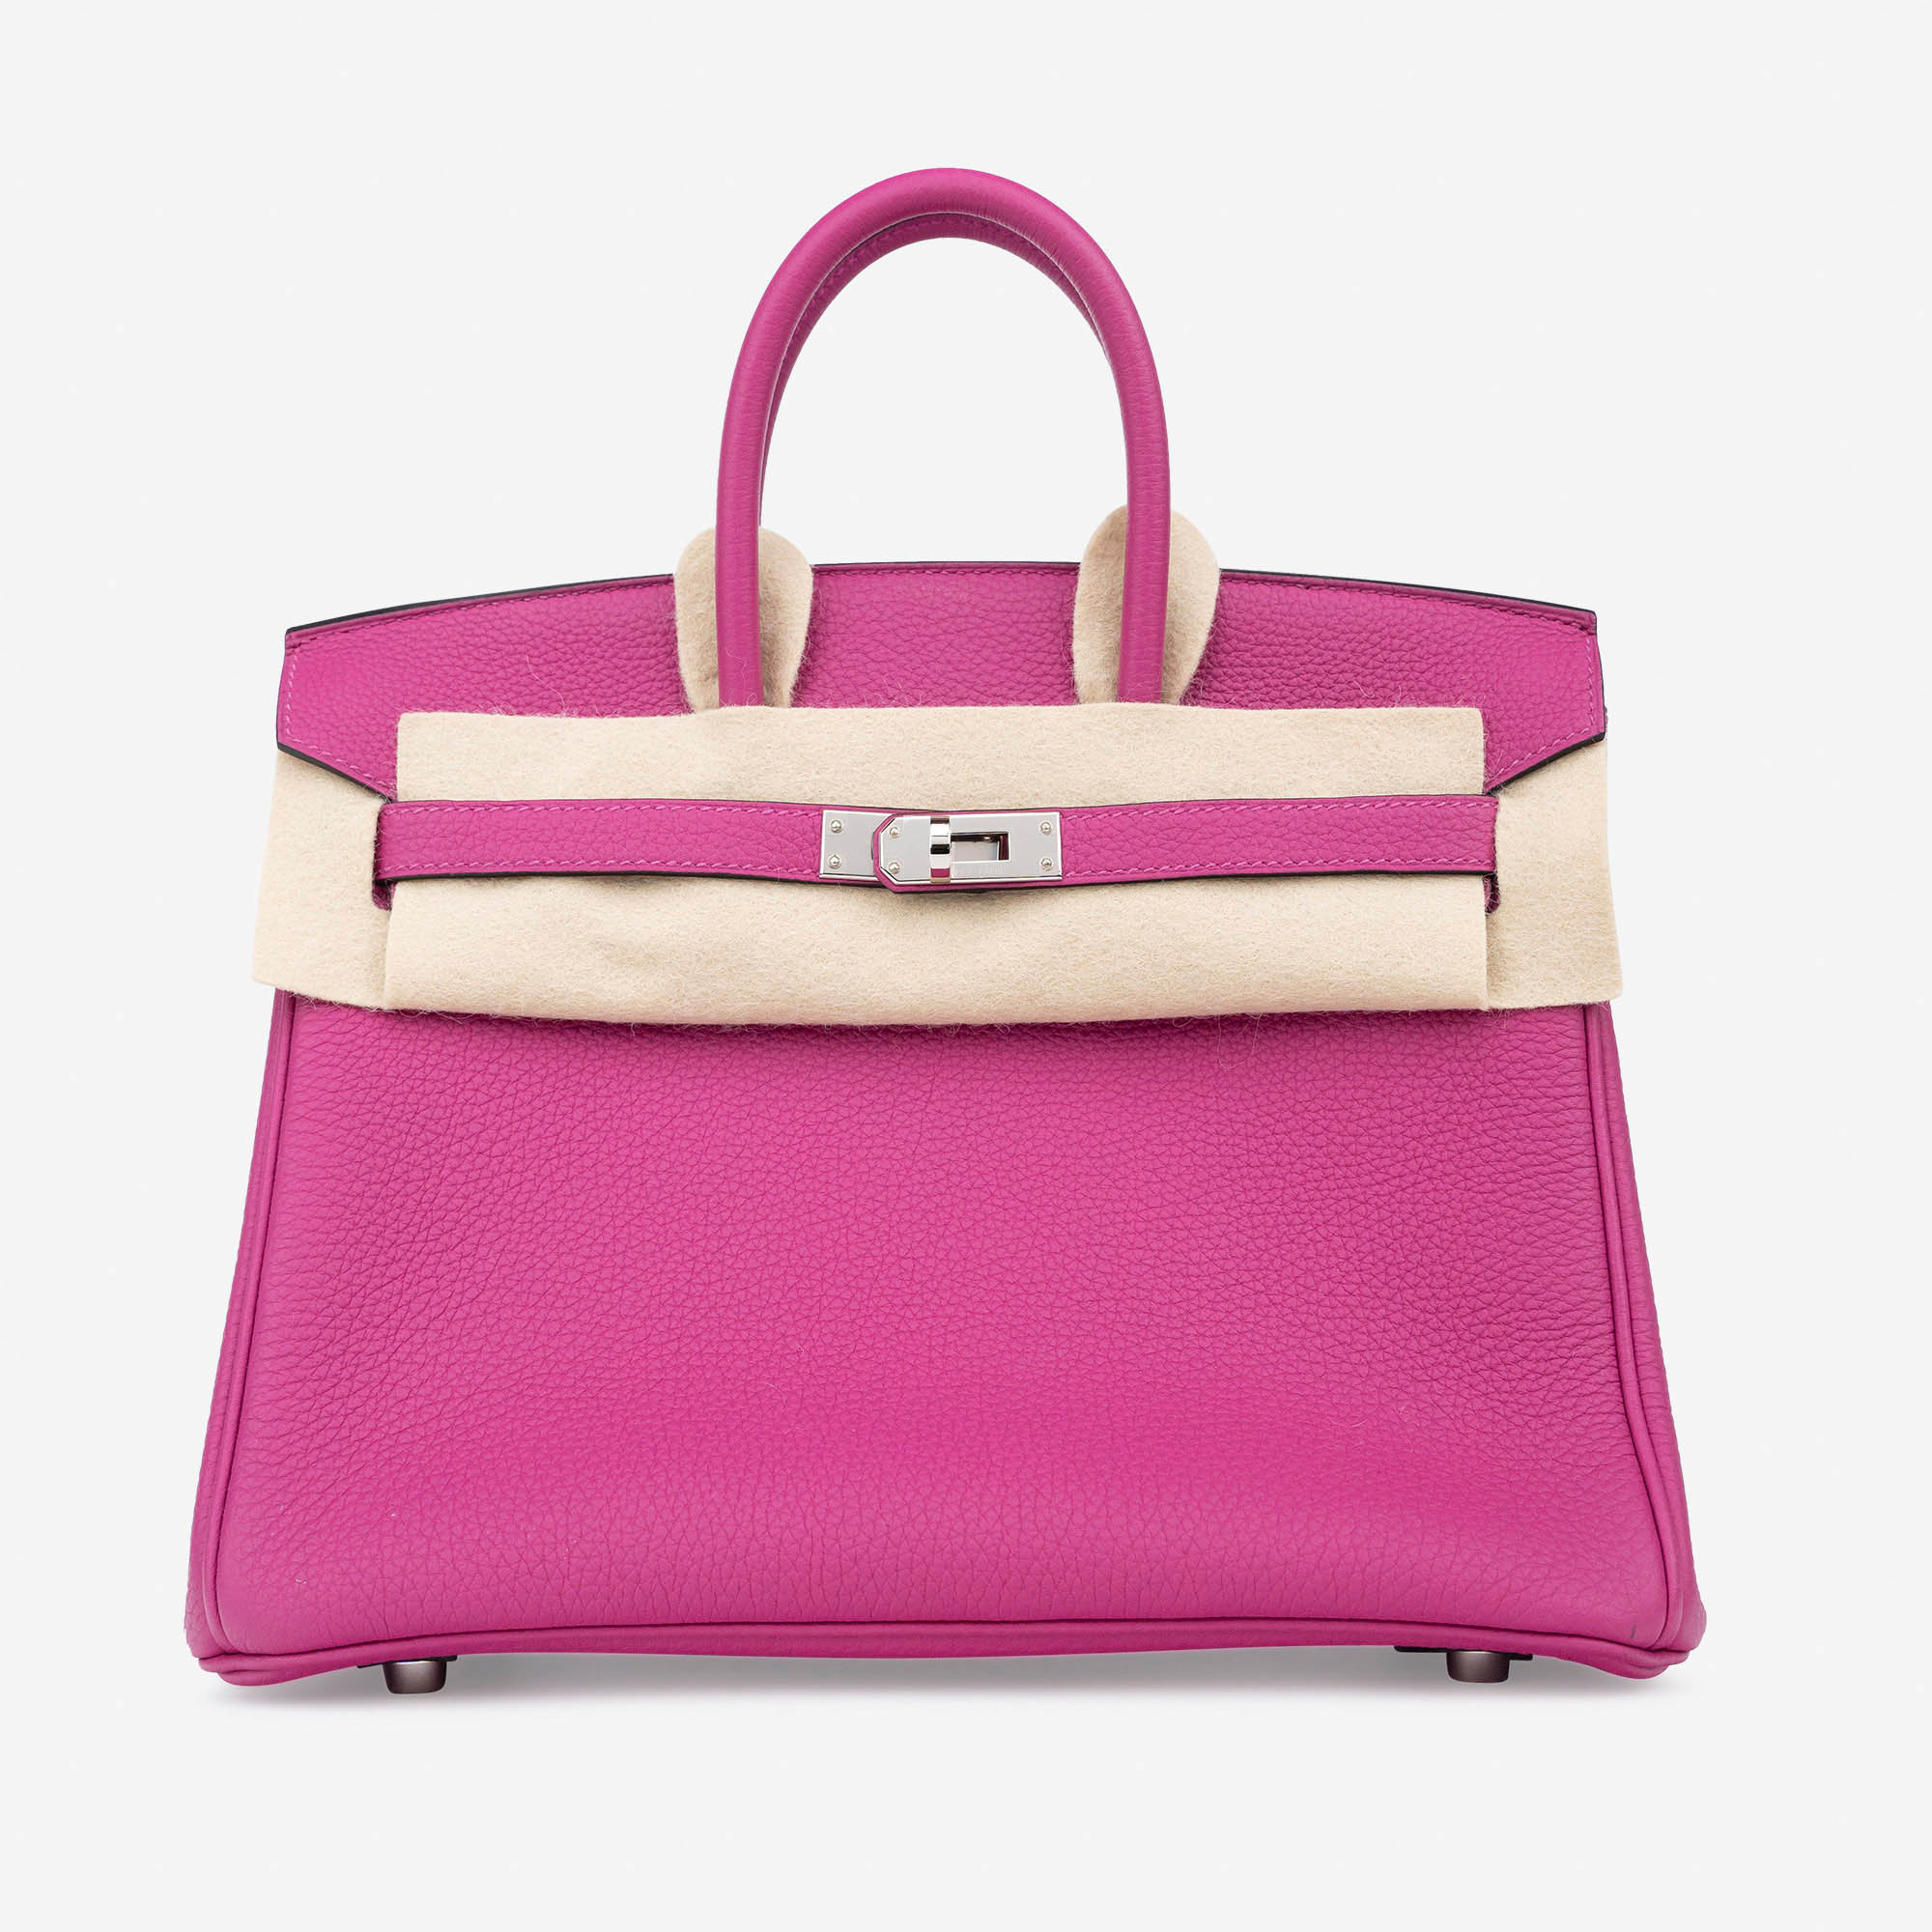 Affordable birkin 25 rose pourpre For Sale, Luxury